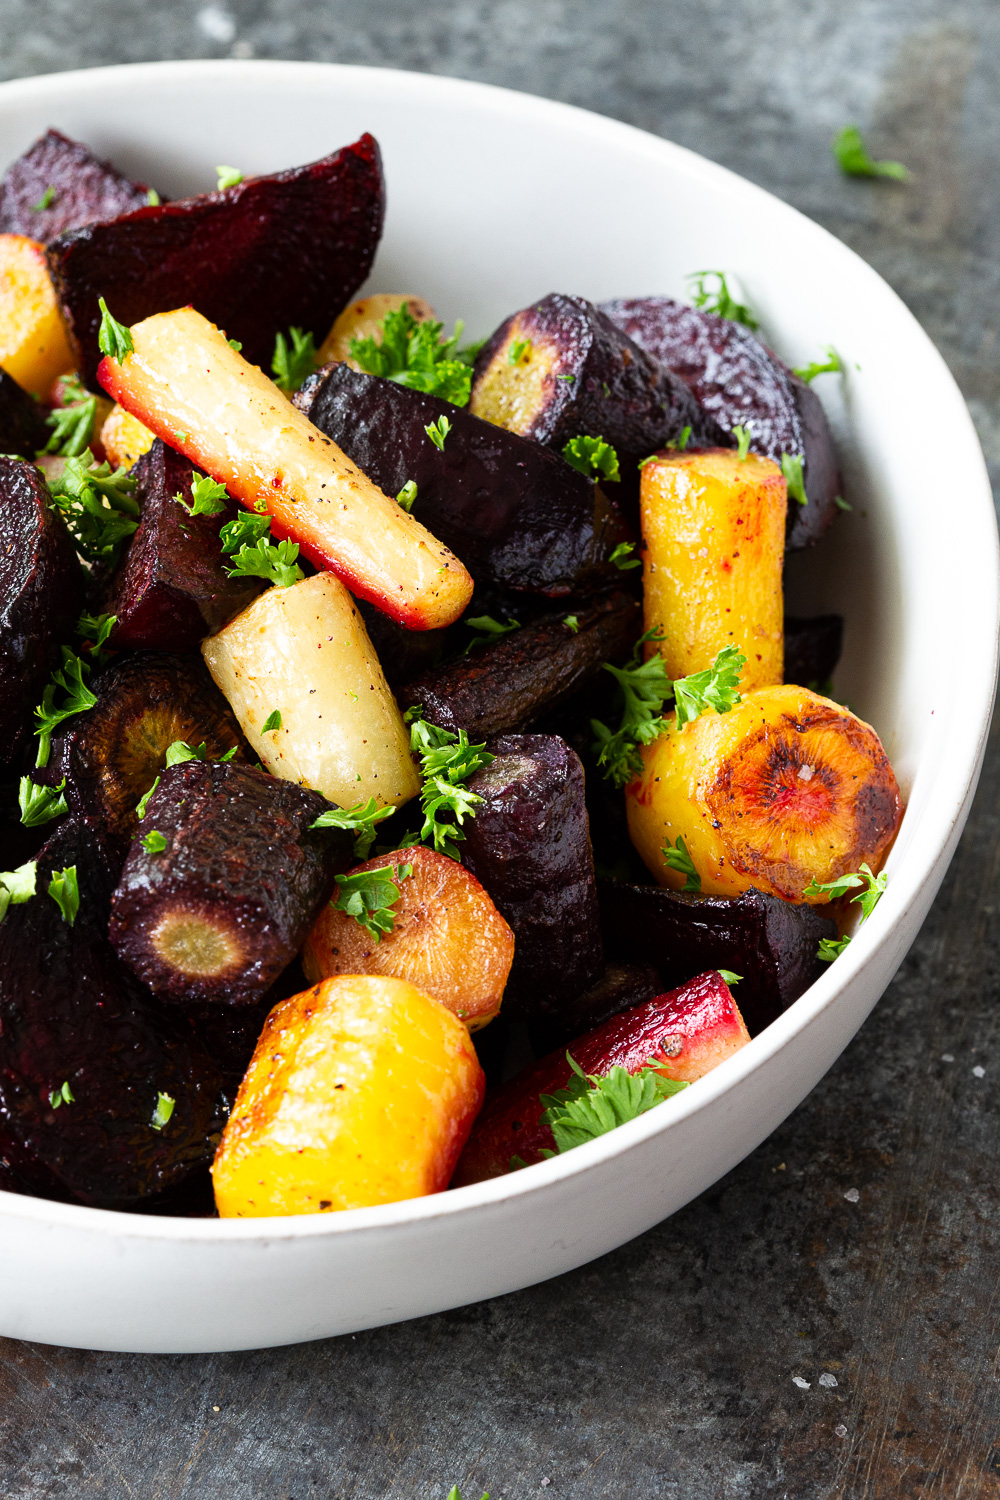 Roasted beets and carrots, with natural sweetness and caramelization, for the ultimate side dish. 